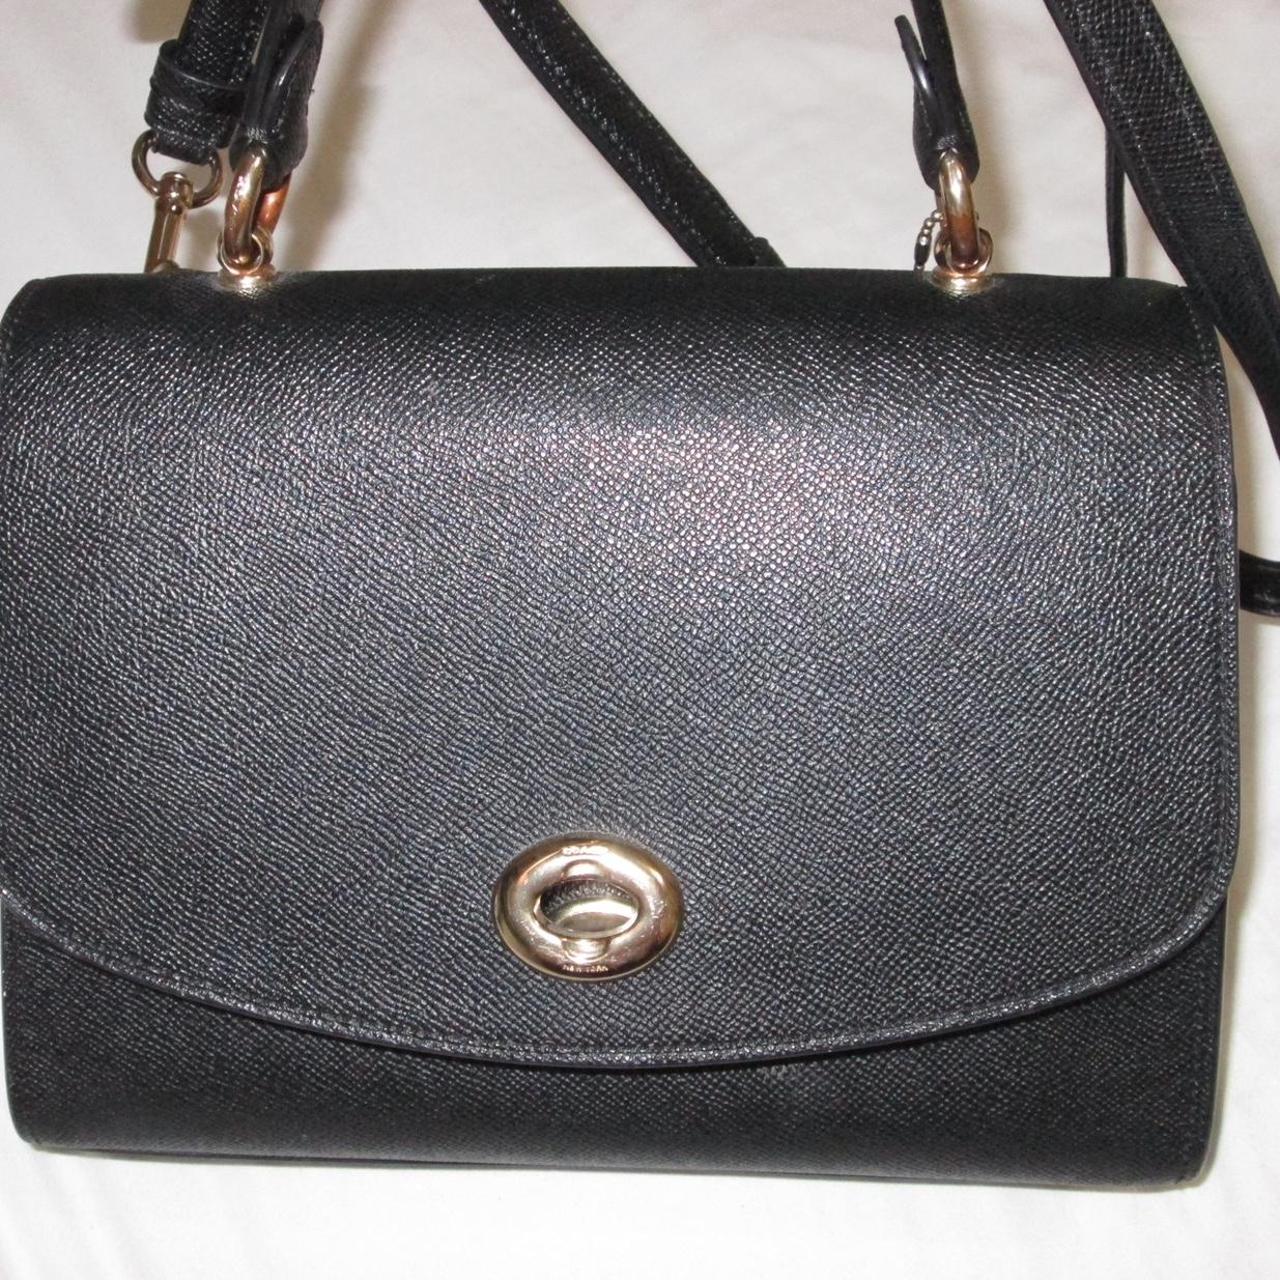 Coach, Bags, Coach Micro Tilly Top Handle Satchel Black Leather